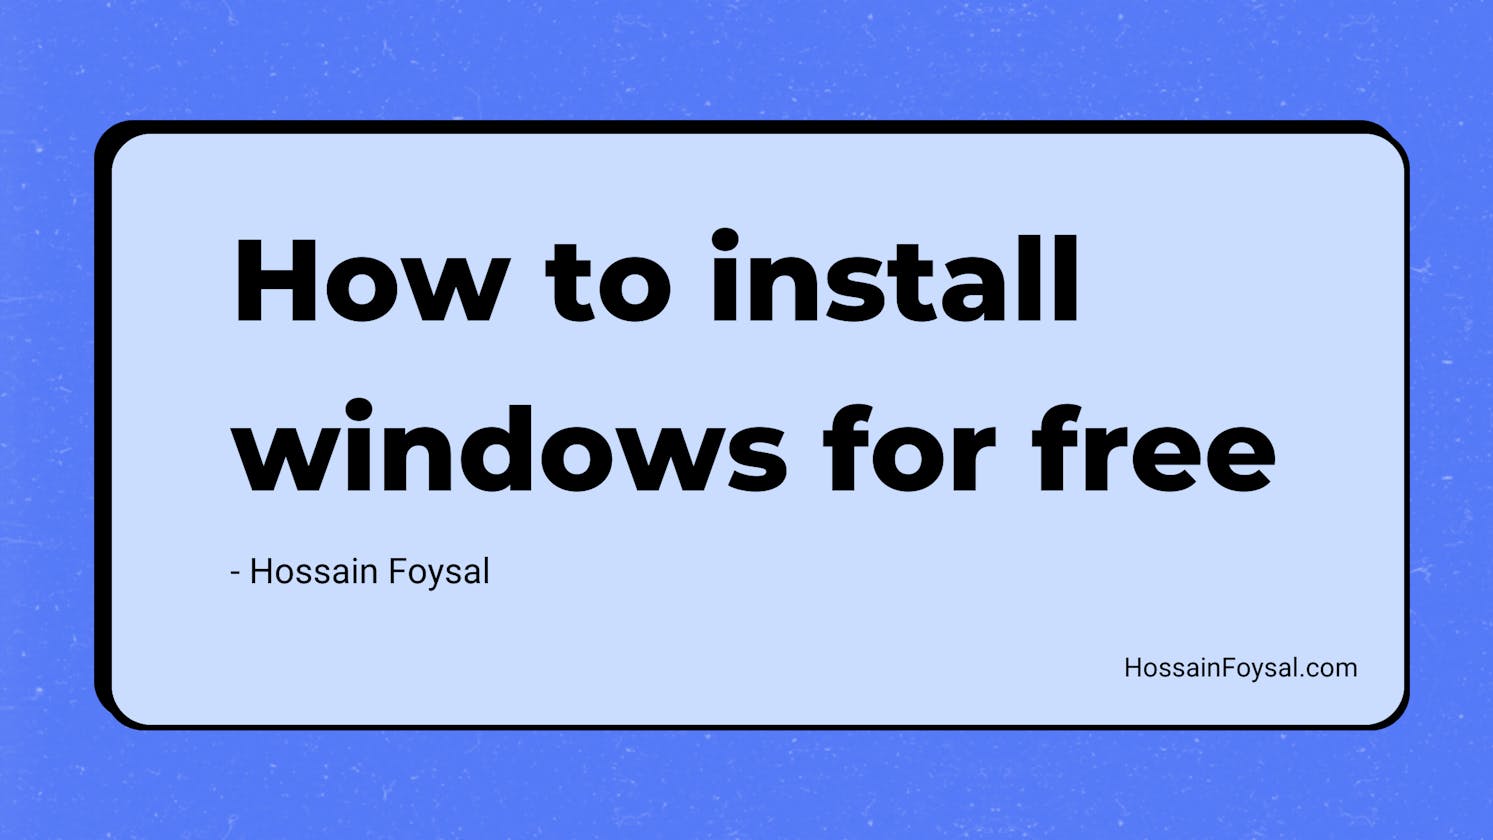 How to install windows for free